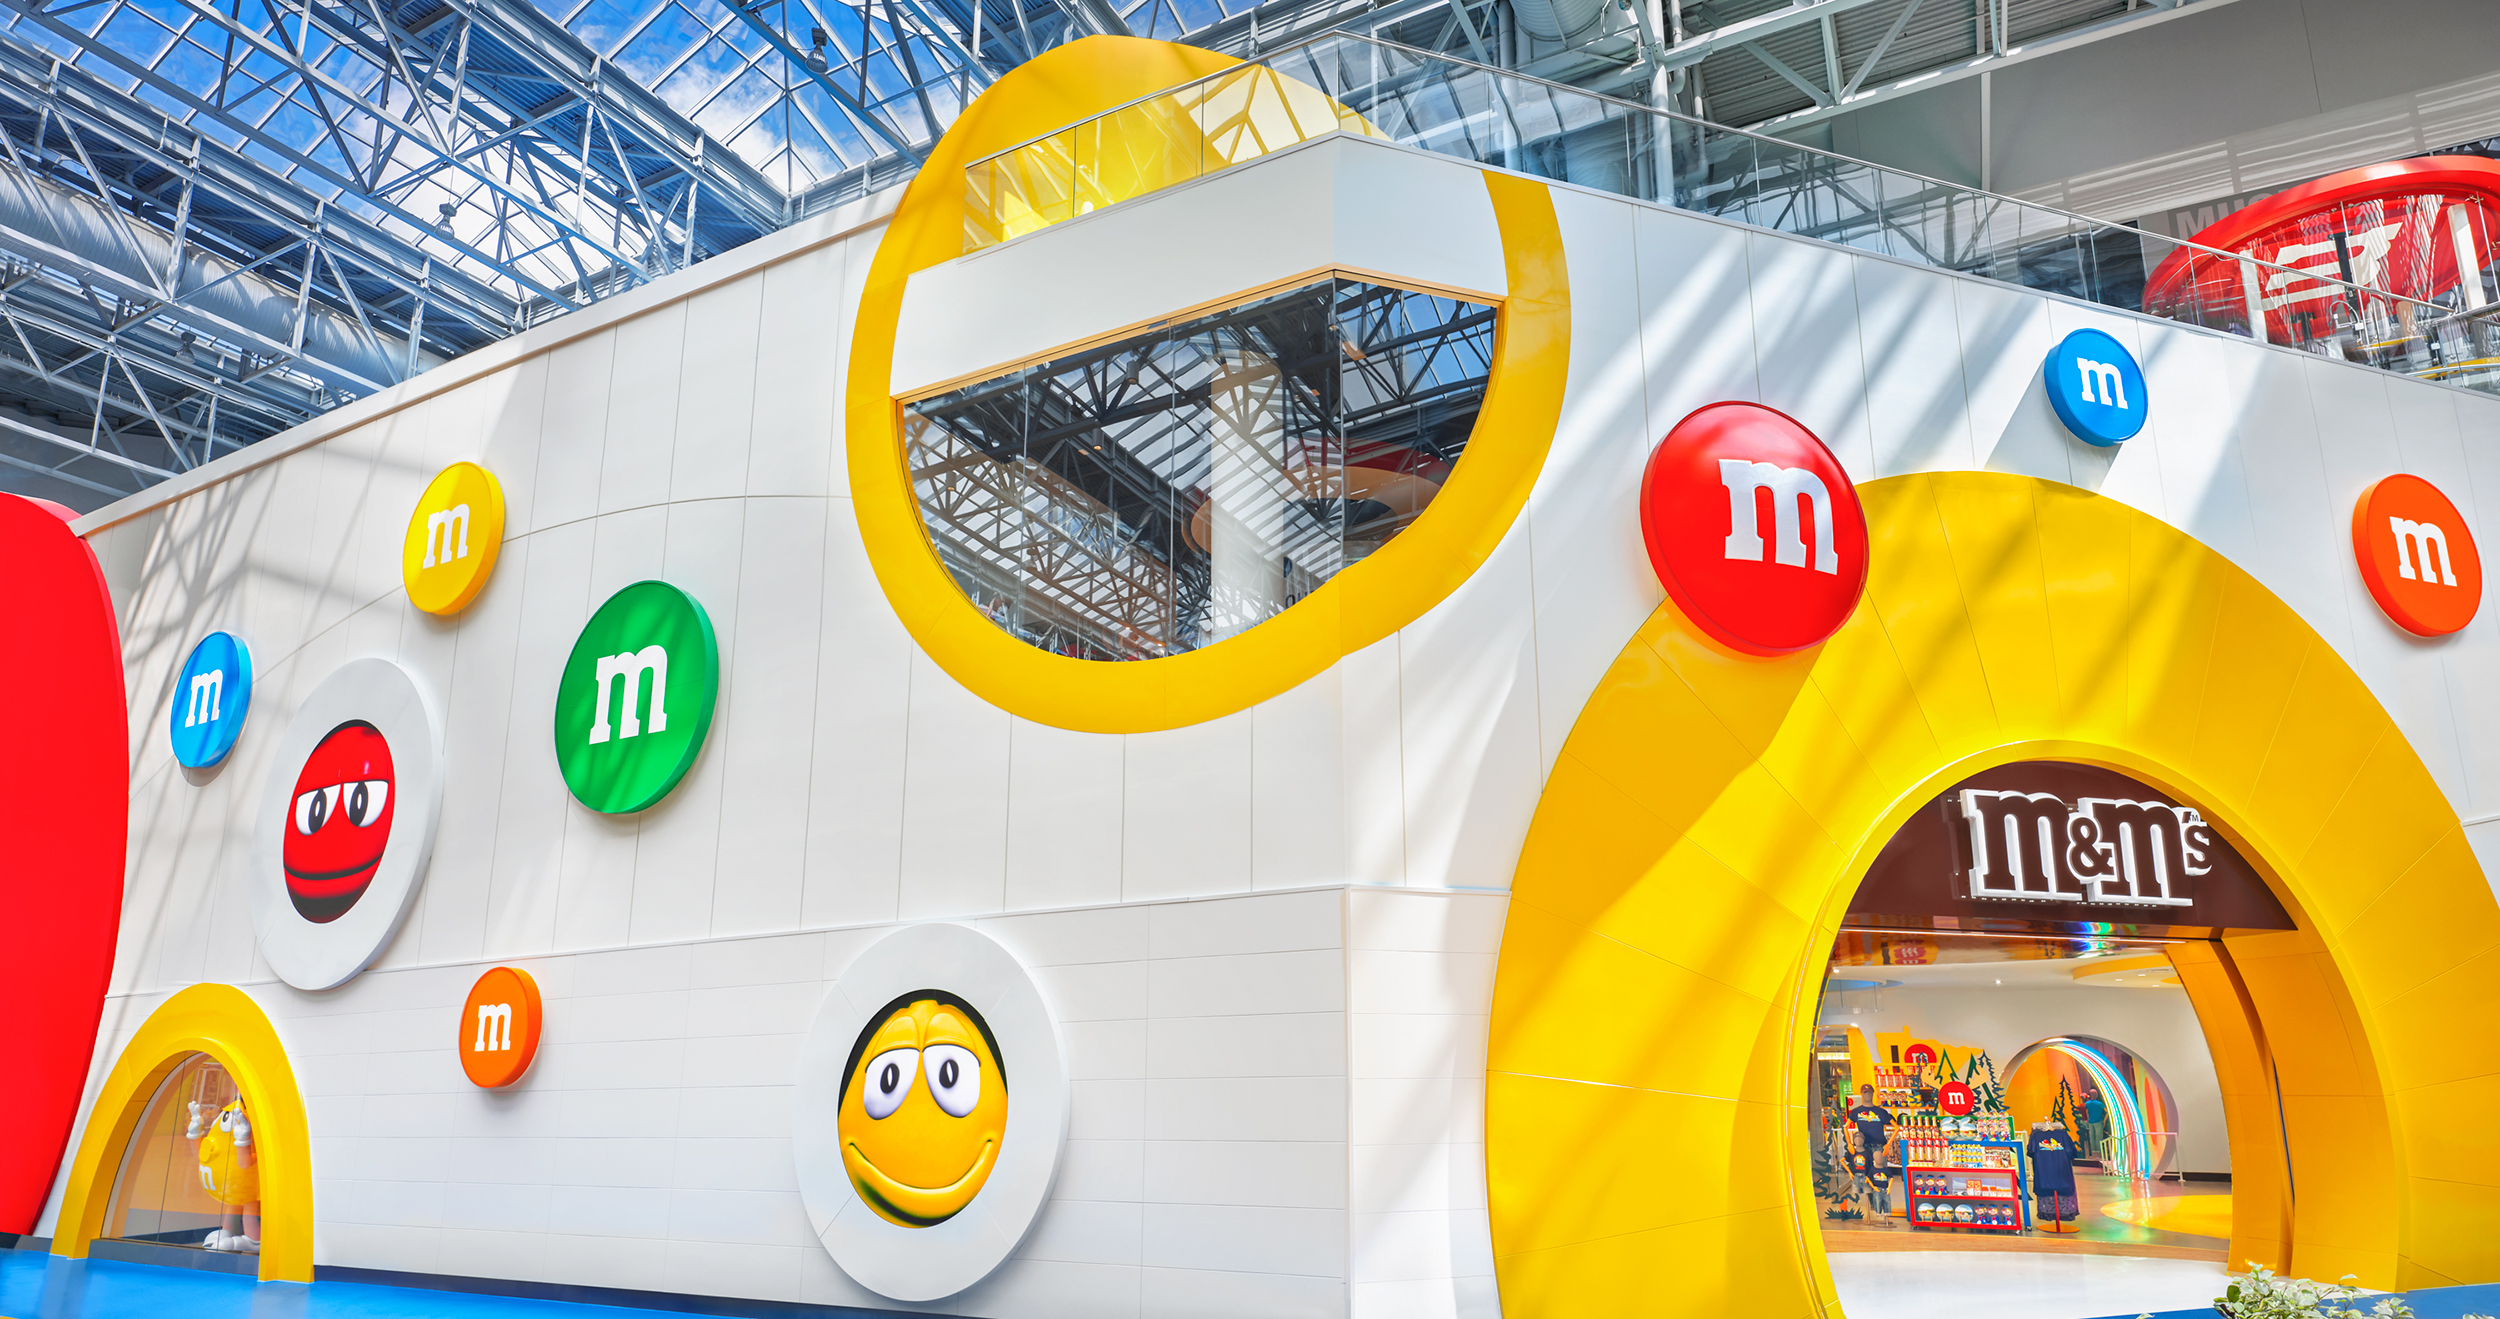 Inside M&M's World London - The world's largest candy store